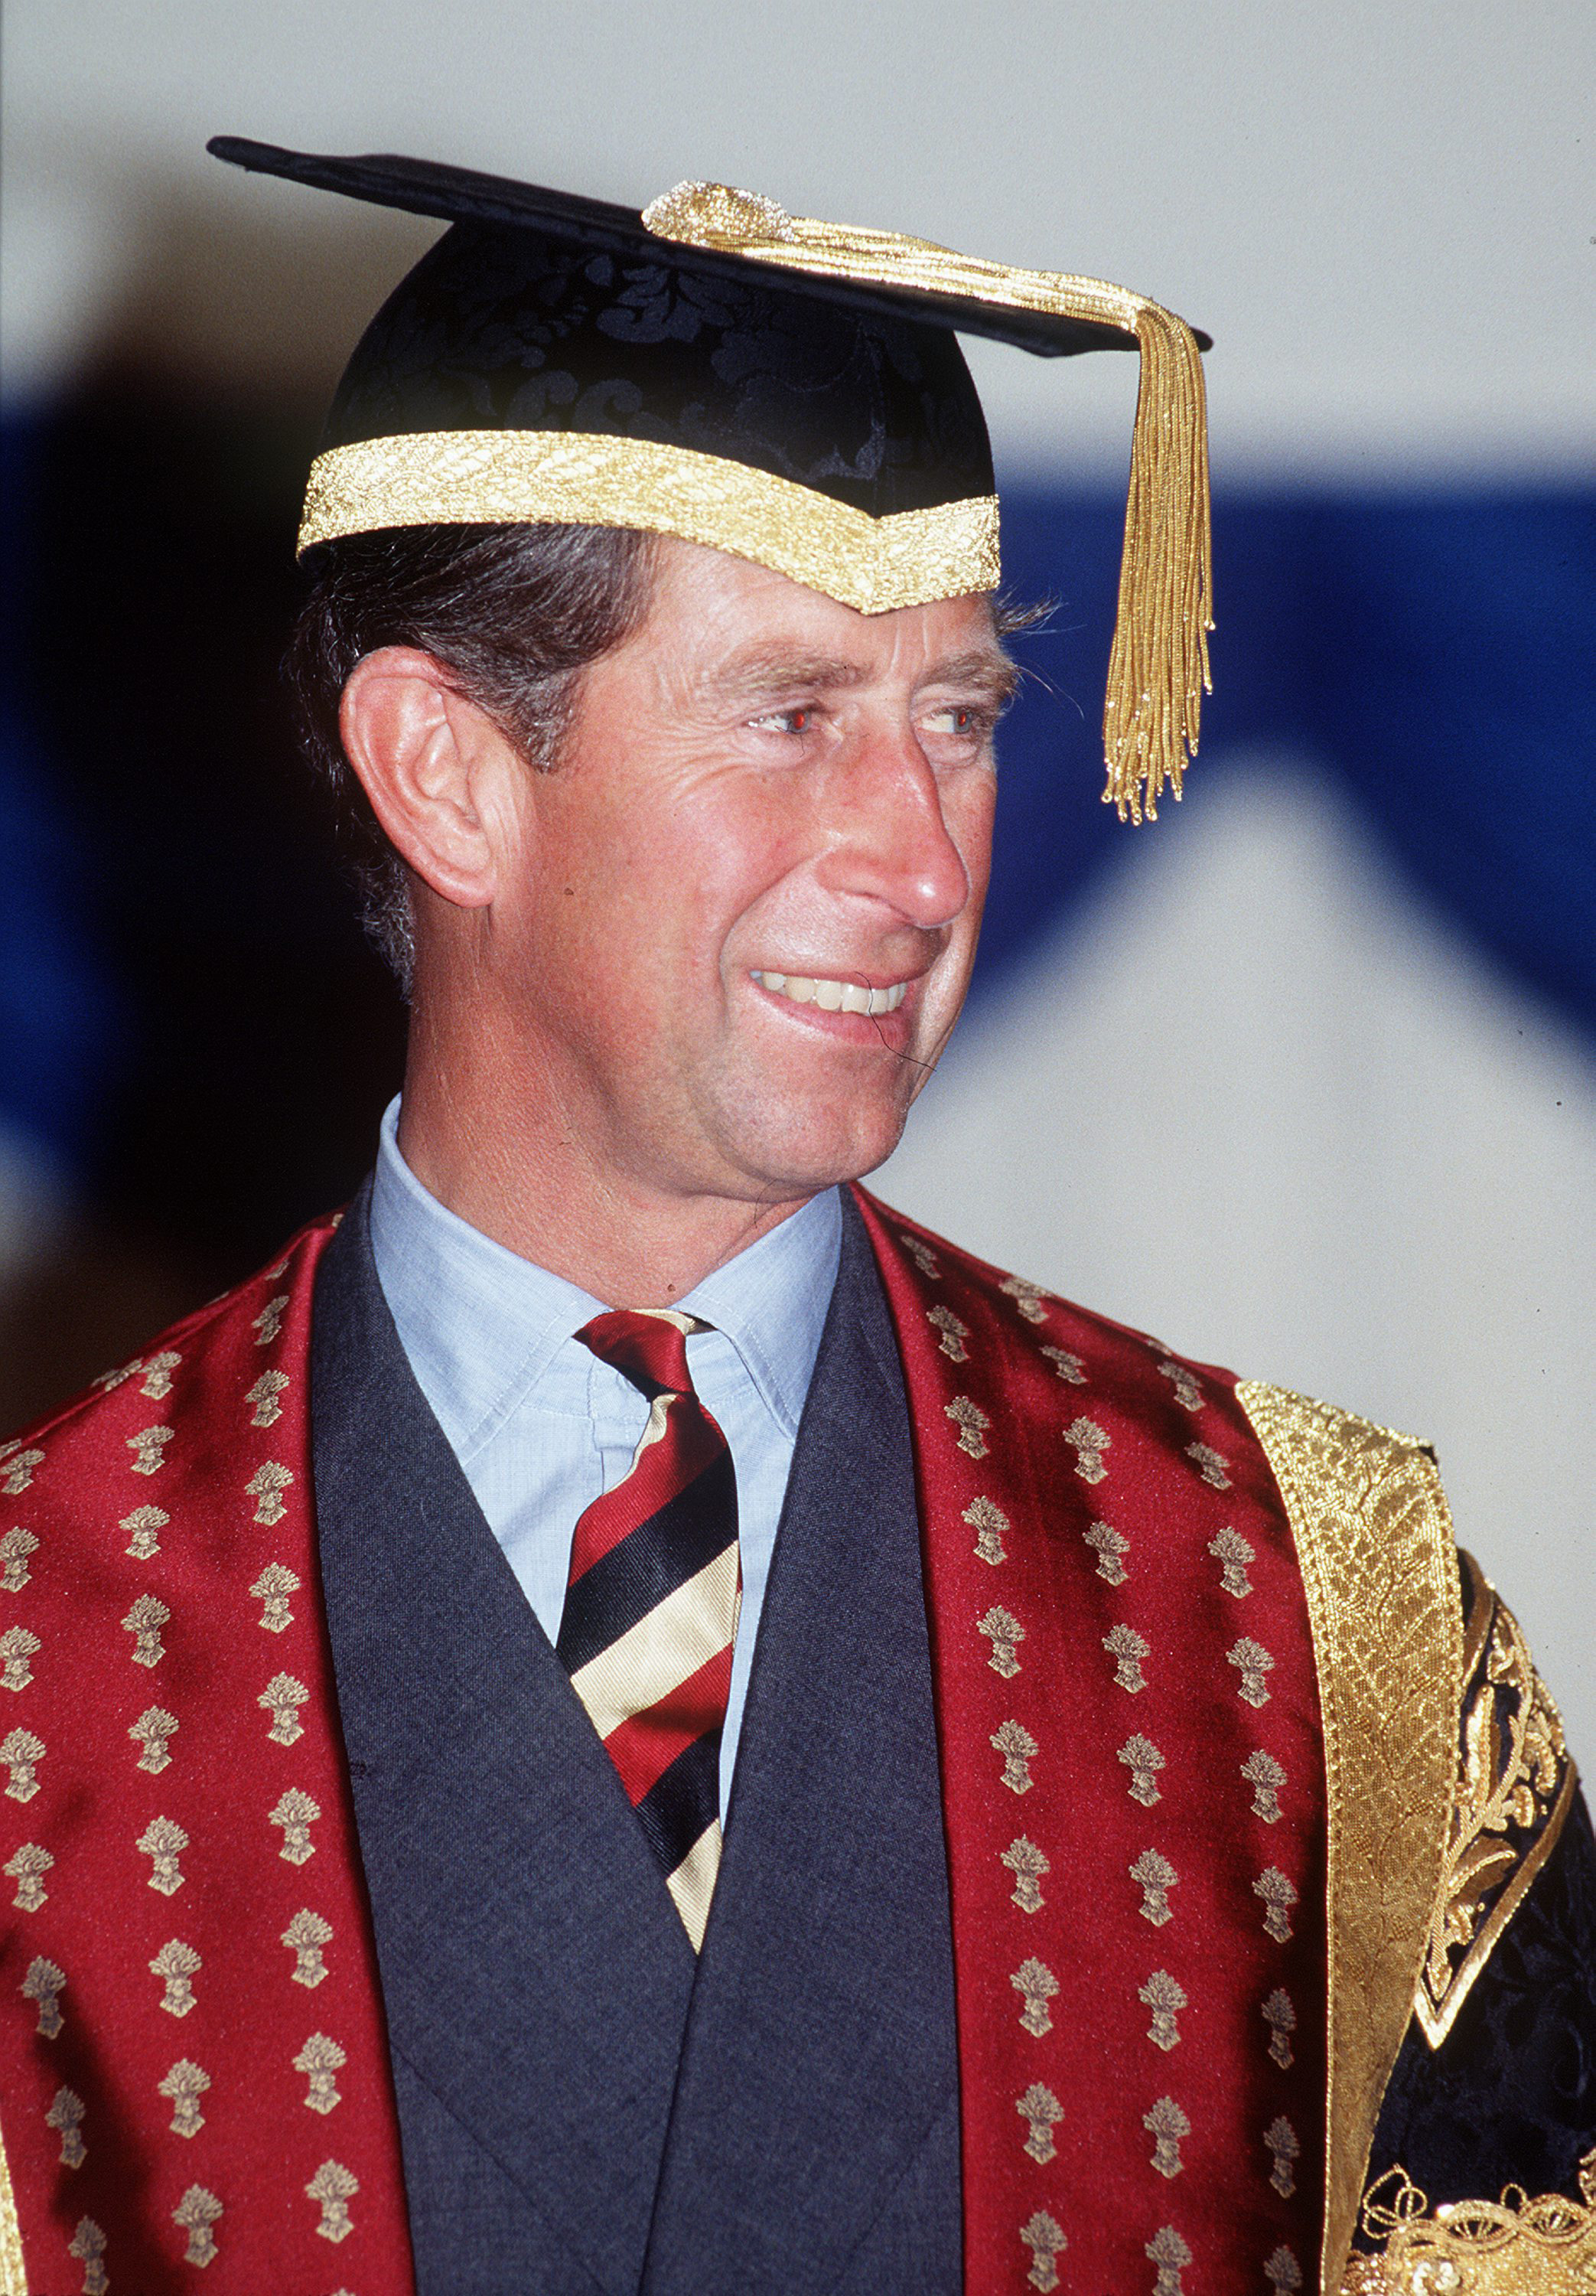 Prince Charles, Prince of Wales attends a graduation ceremony at The Royal Agricultural College in Cirencester England, on October 7, 1995. | Source: Getty Images